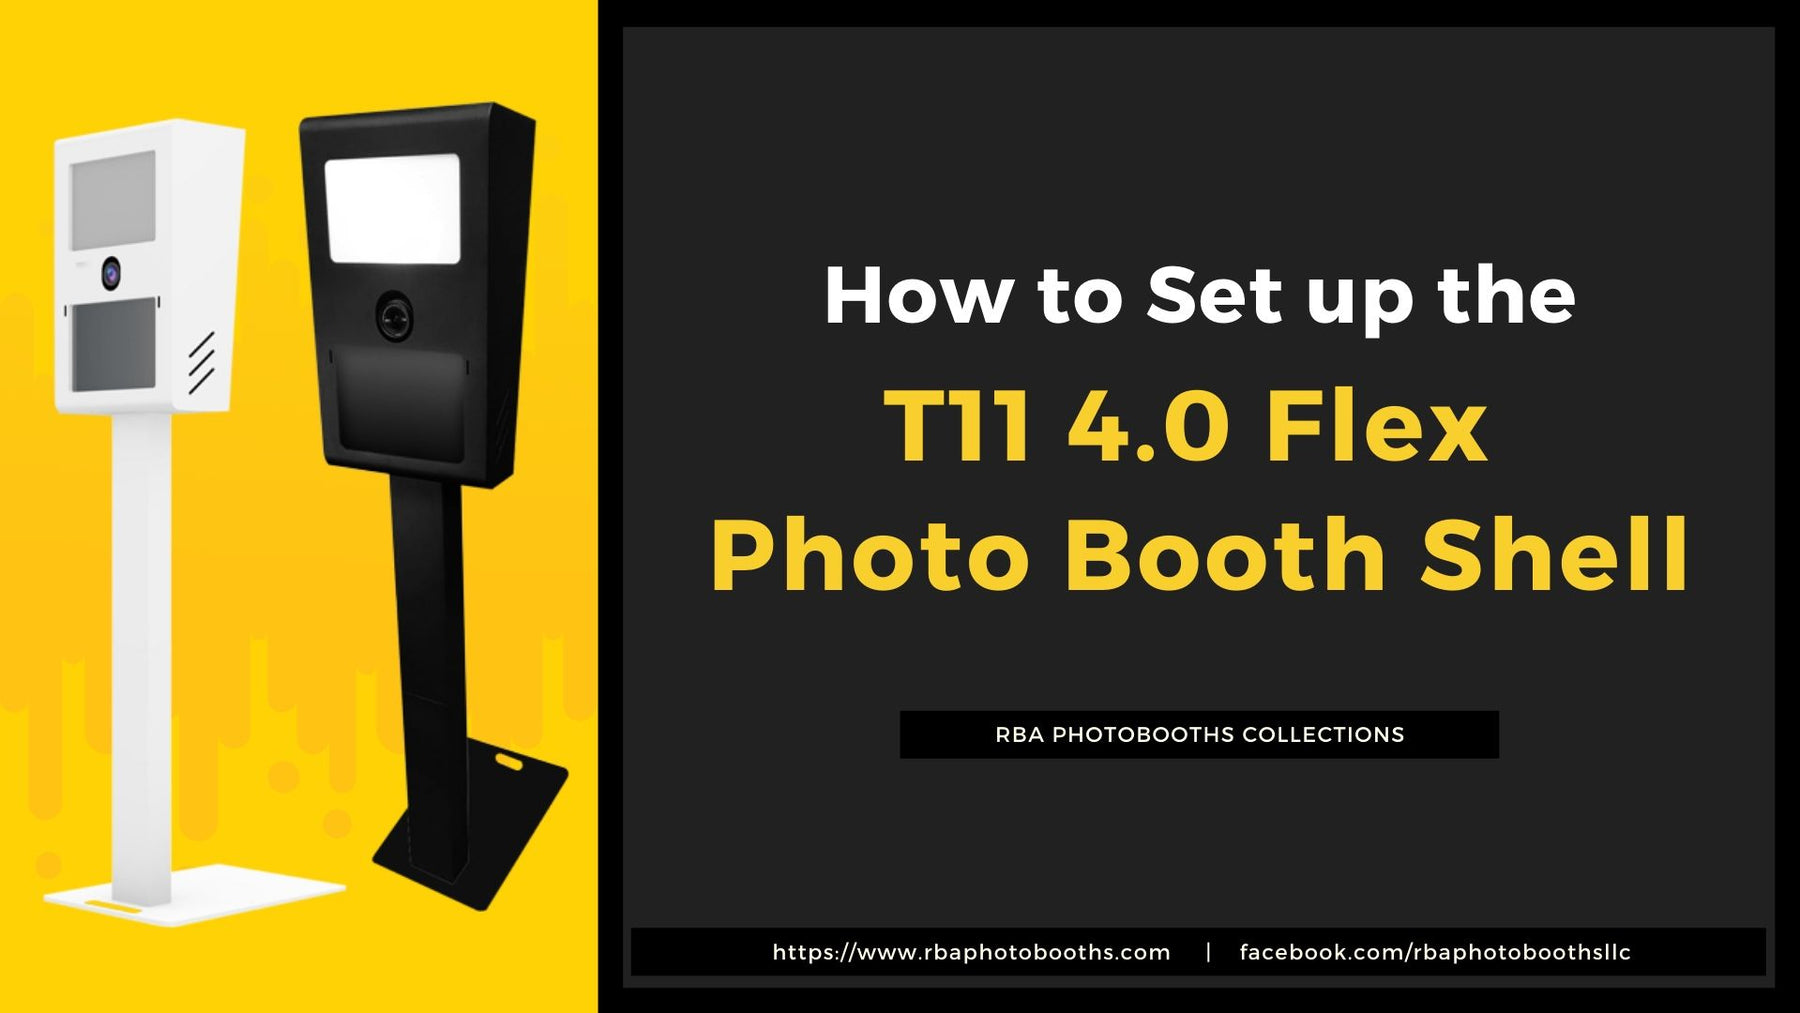 How to Assemble or Setup the T11 4.0 Flex Photo Booth Shell Enclosure